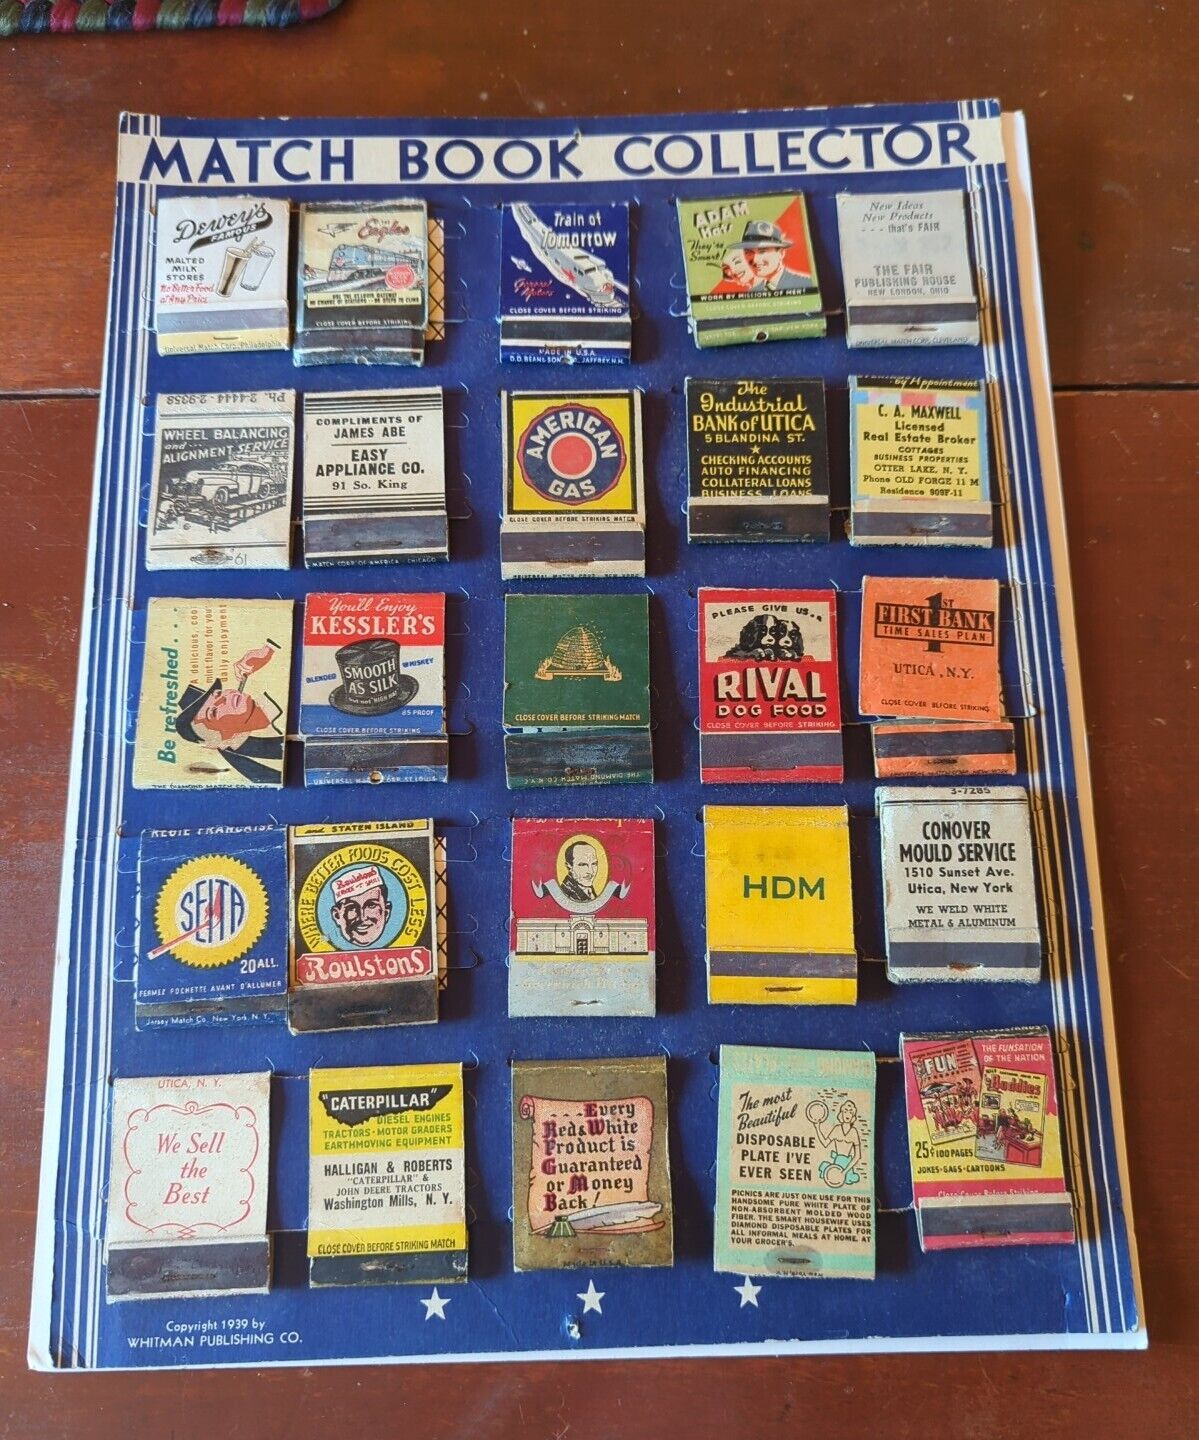 25 Vintage Matchbook Covers Advertisements Match Books in Display Cardboard 